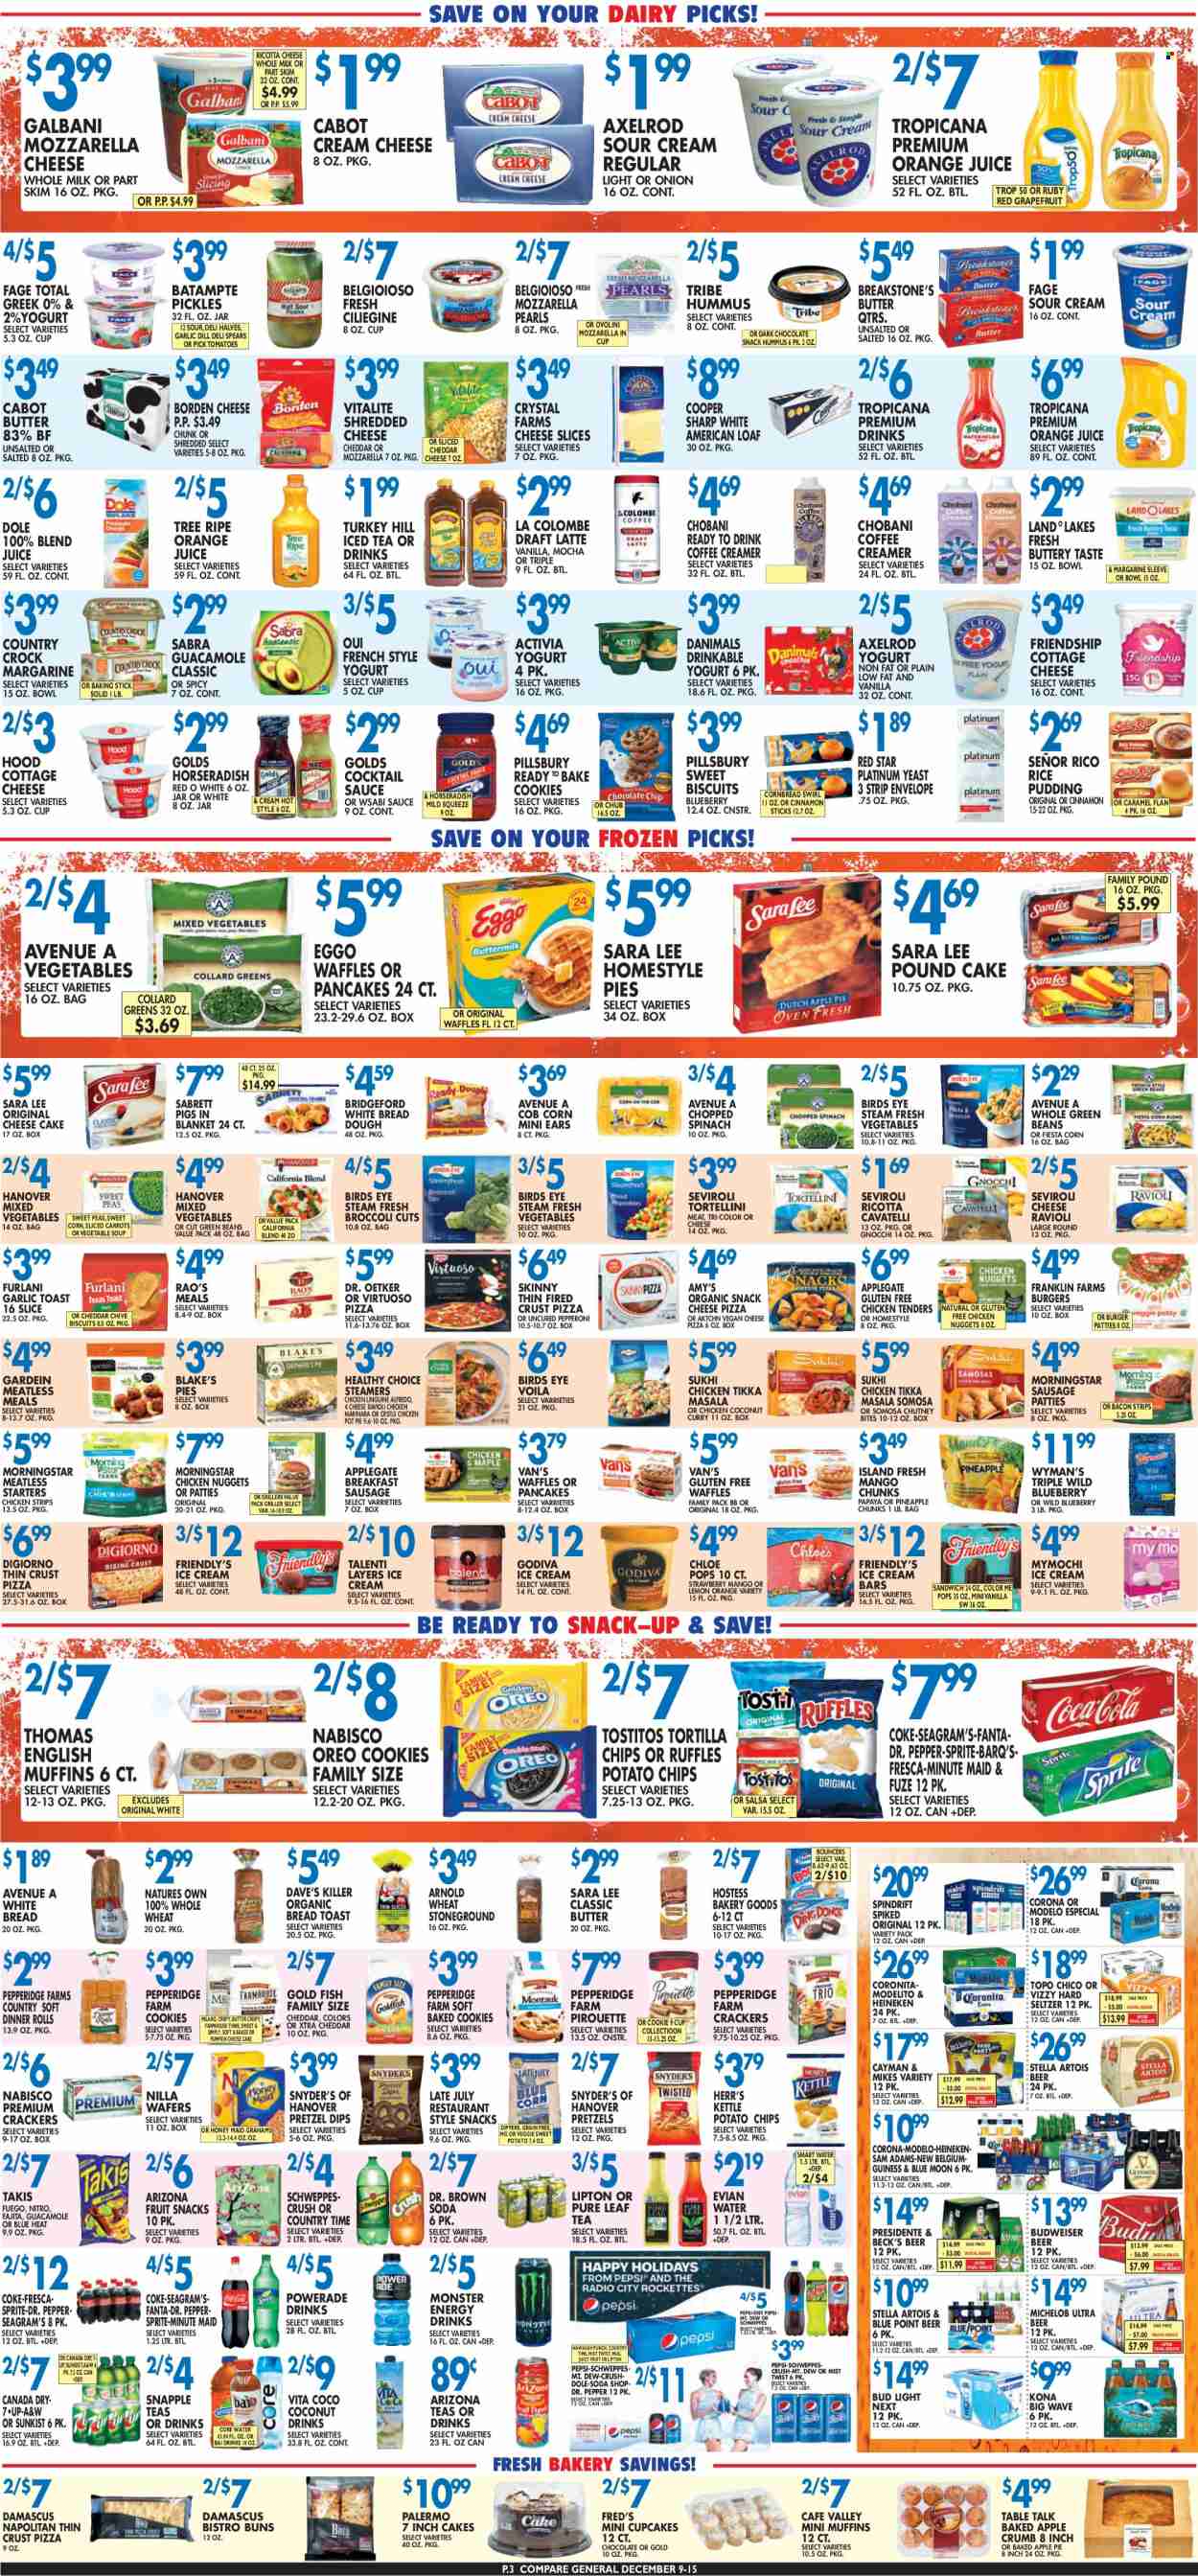 Compare Foods ad  - 12.09.2022 - 12.15.2022.